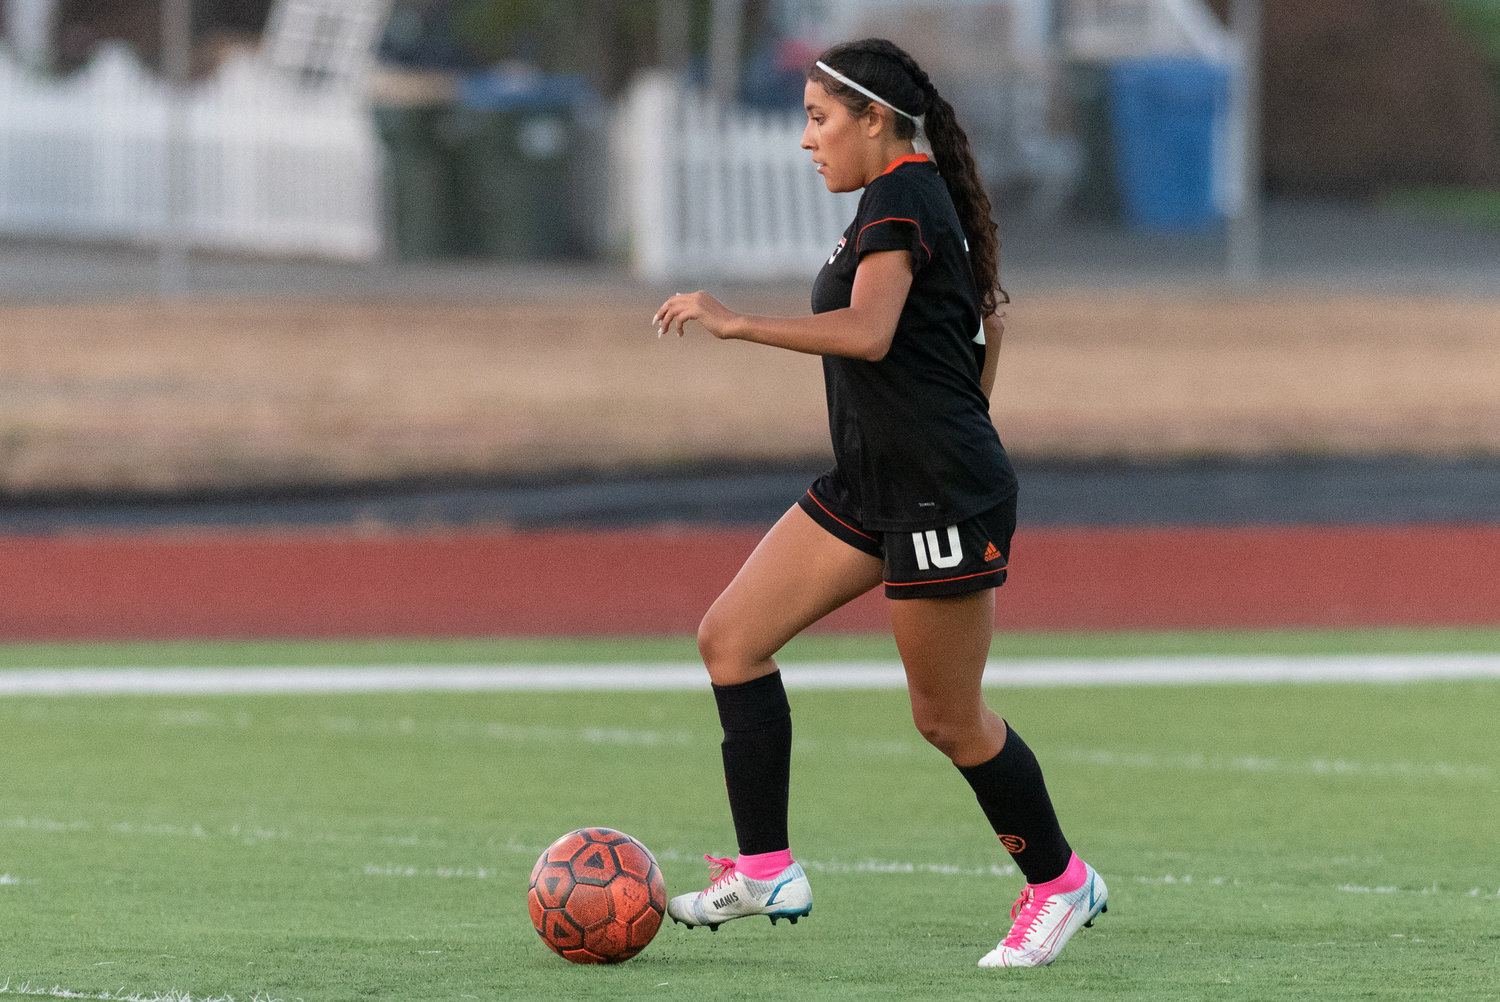 Centralia junior Anahi Corona takes possession of the ball in the midfield during the first half of the Tigers' home match against Shelton on Sept. 20.